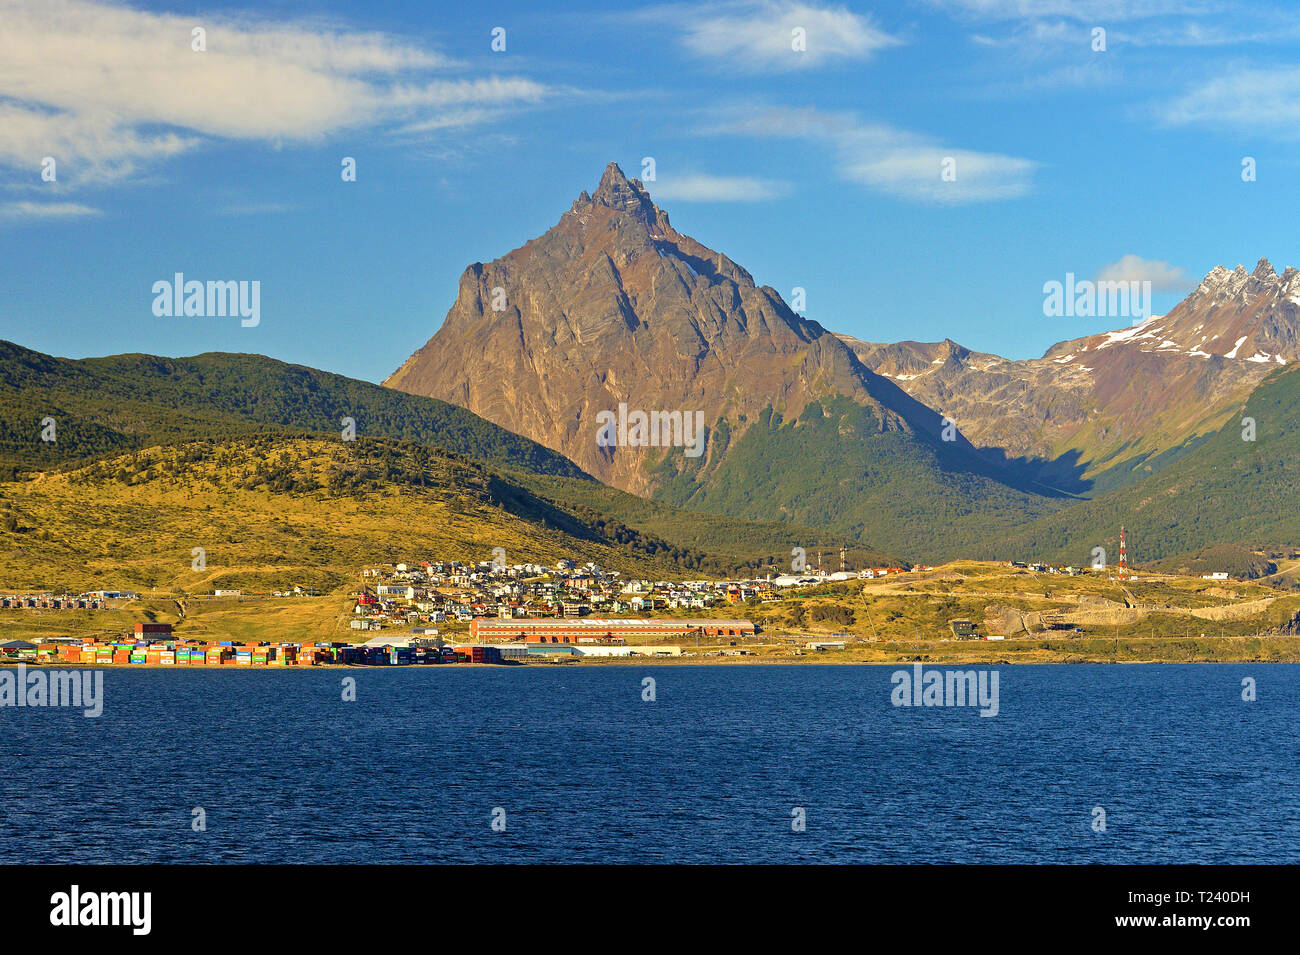 Ushuaia, the southernmost city in the world, Beagle Channel and Andes mountain range rising above, Ushuaia, Tierra del Fuego, Argentina Stock Photo